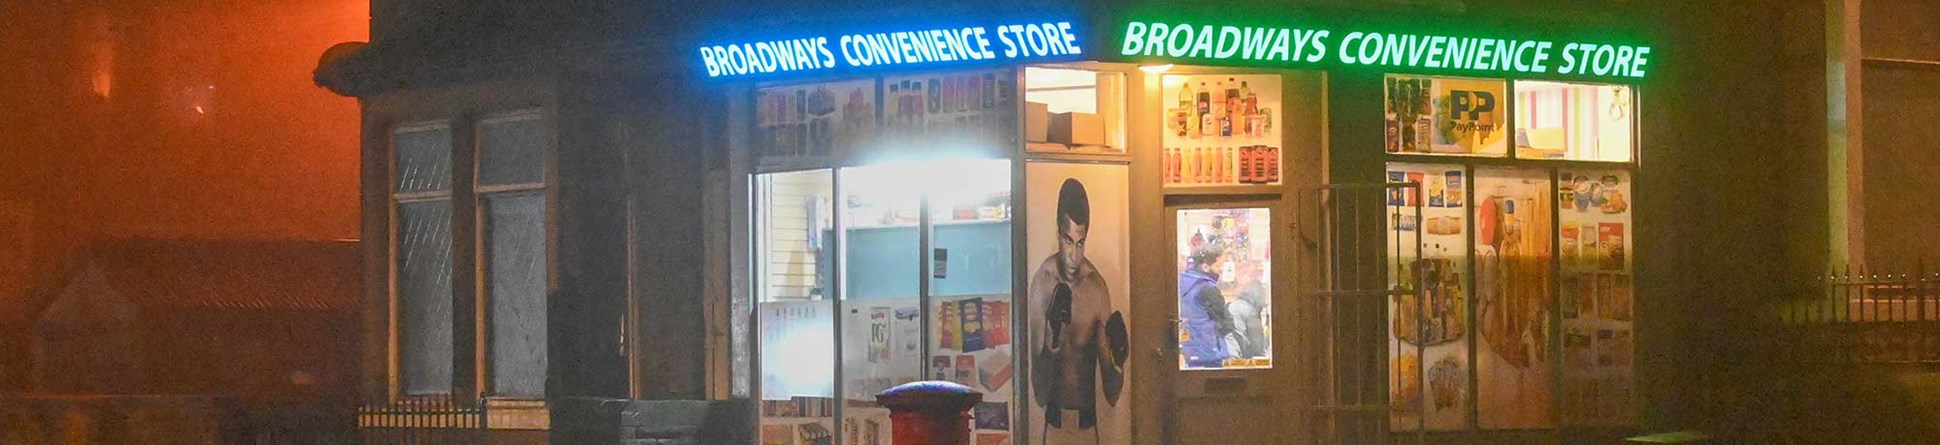 A night time scene showing the illuminated windows of the Broadways Convenience Store.